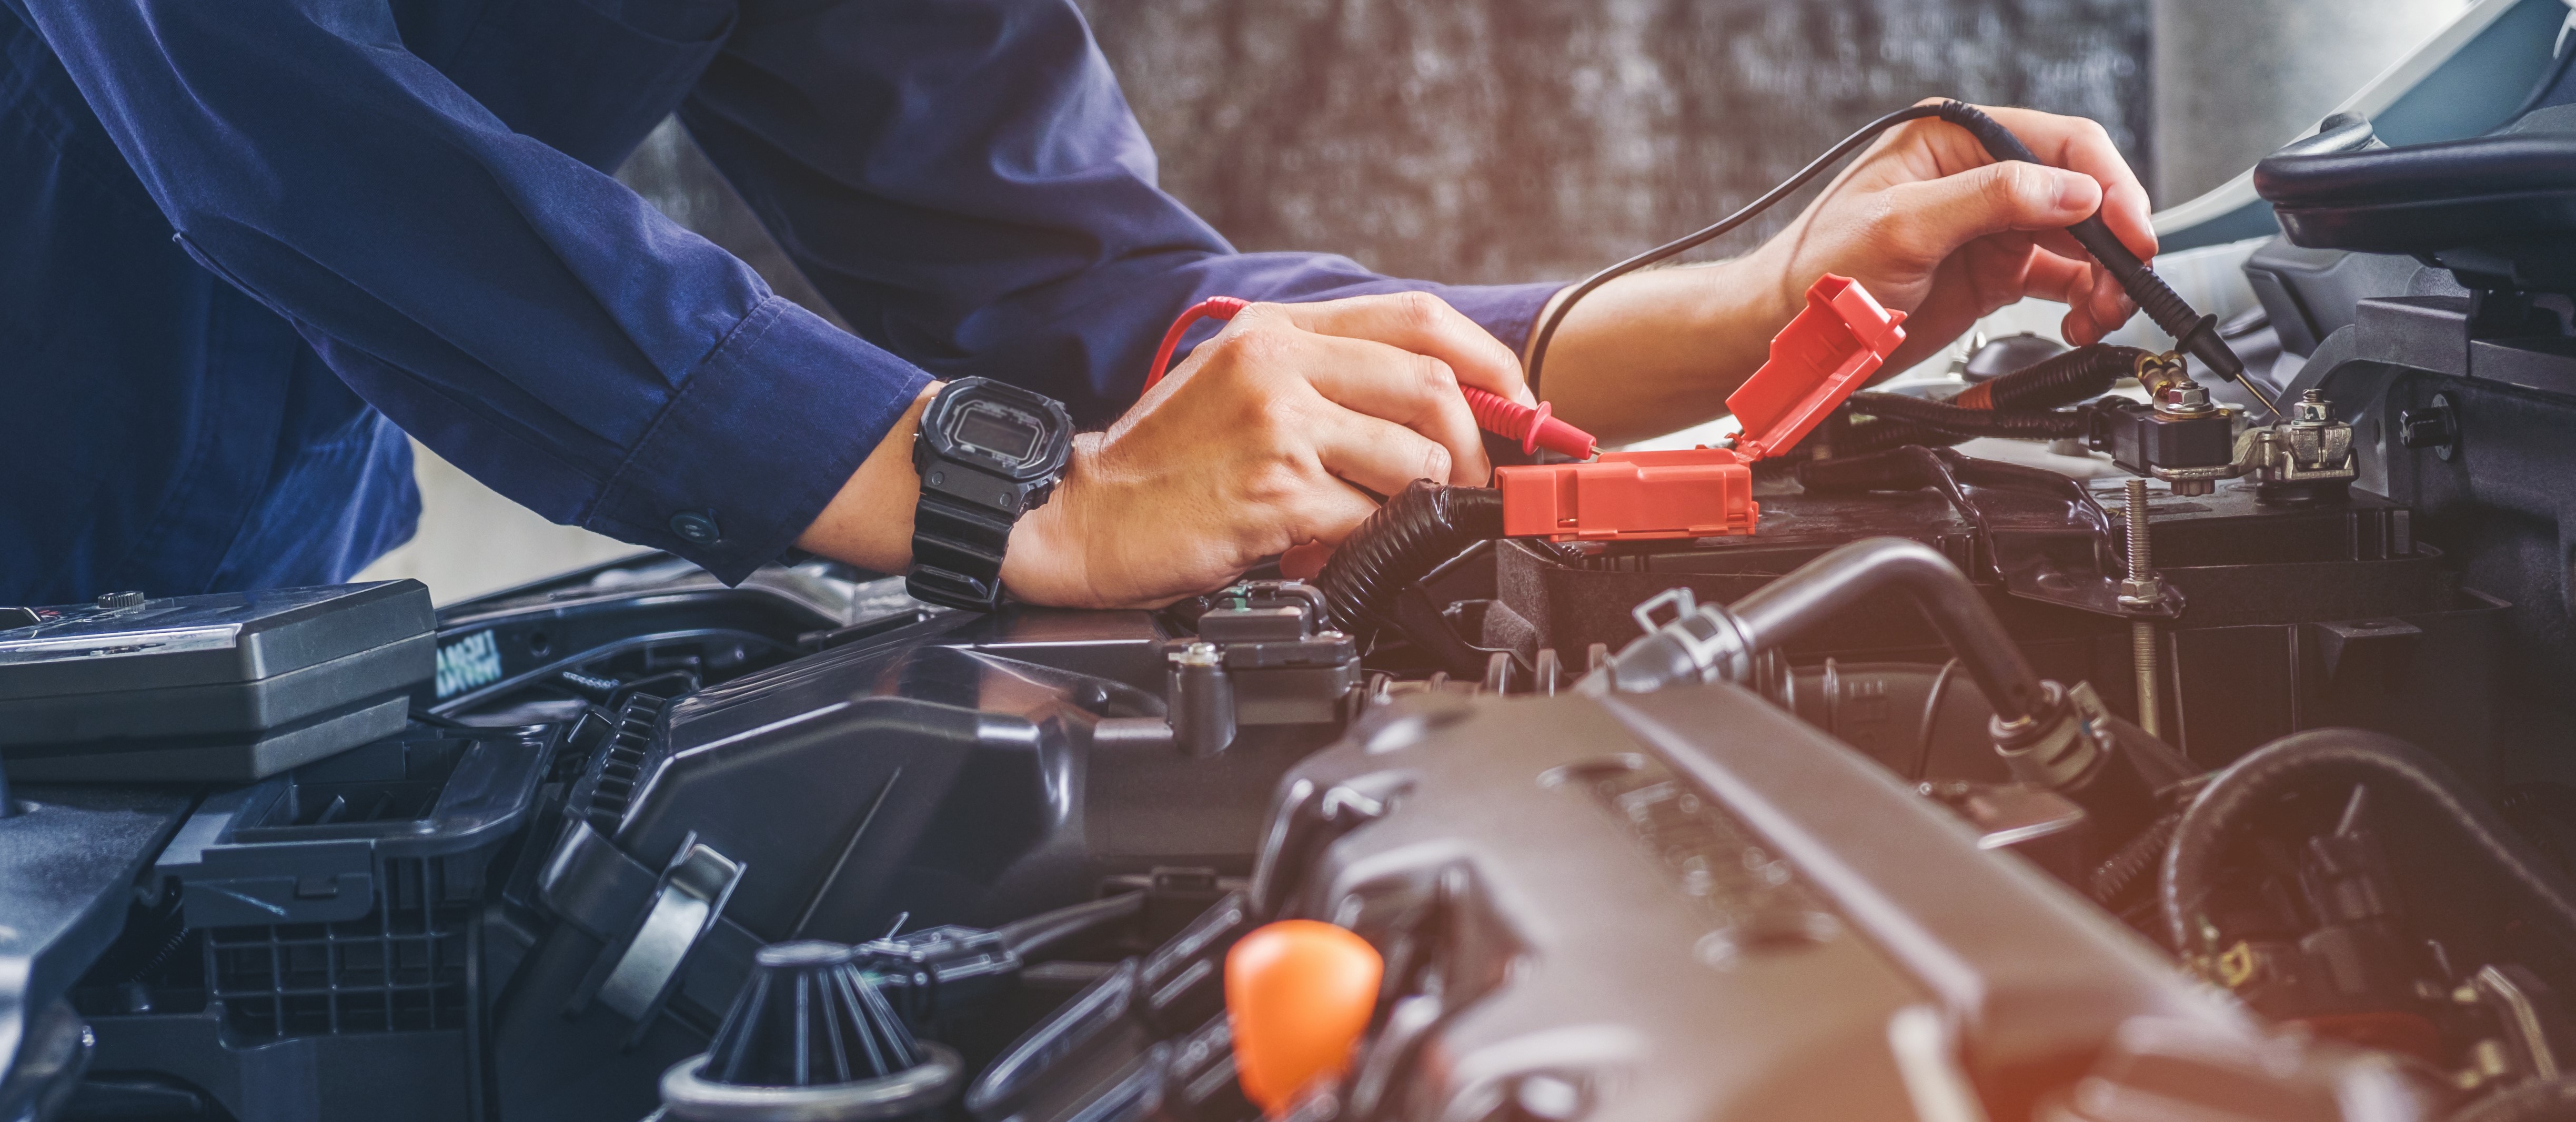 Mechanic performing Auto Repair services under the hood of a car